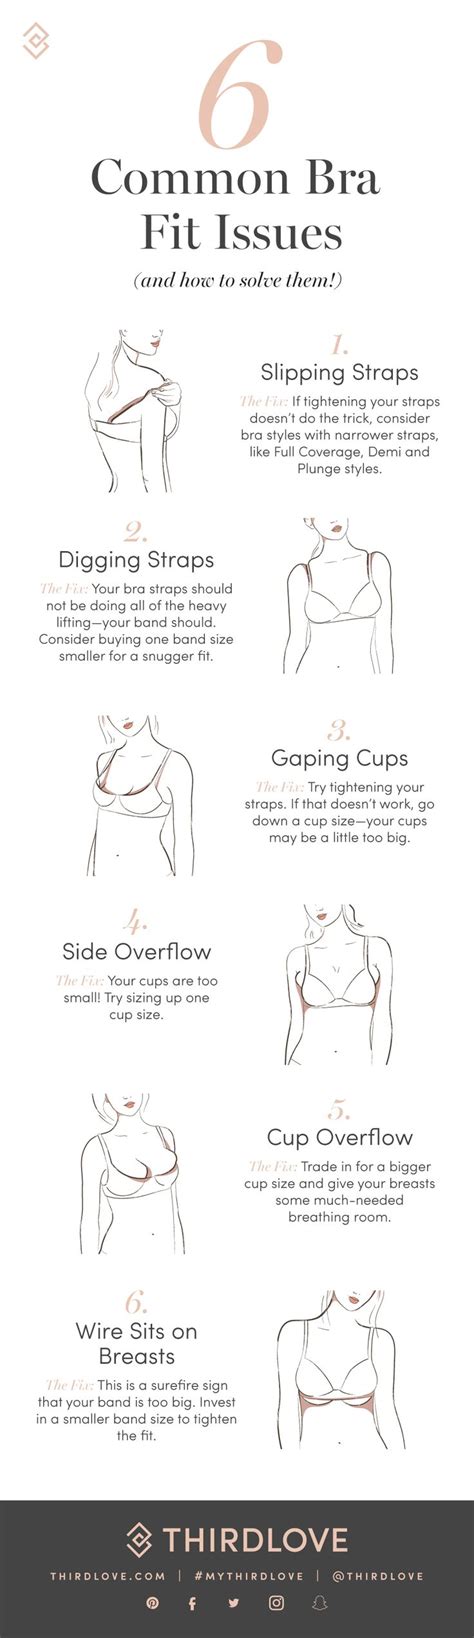 fit issues and solutions thirdlove blog bra fitting guide bra fitting thirdlove